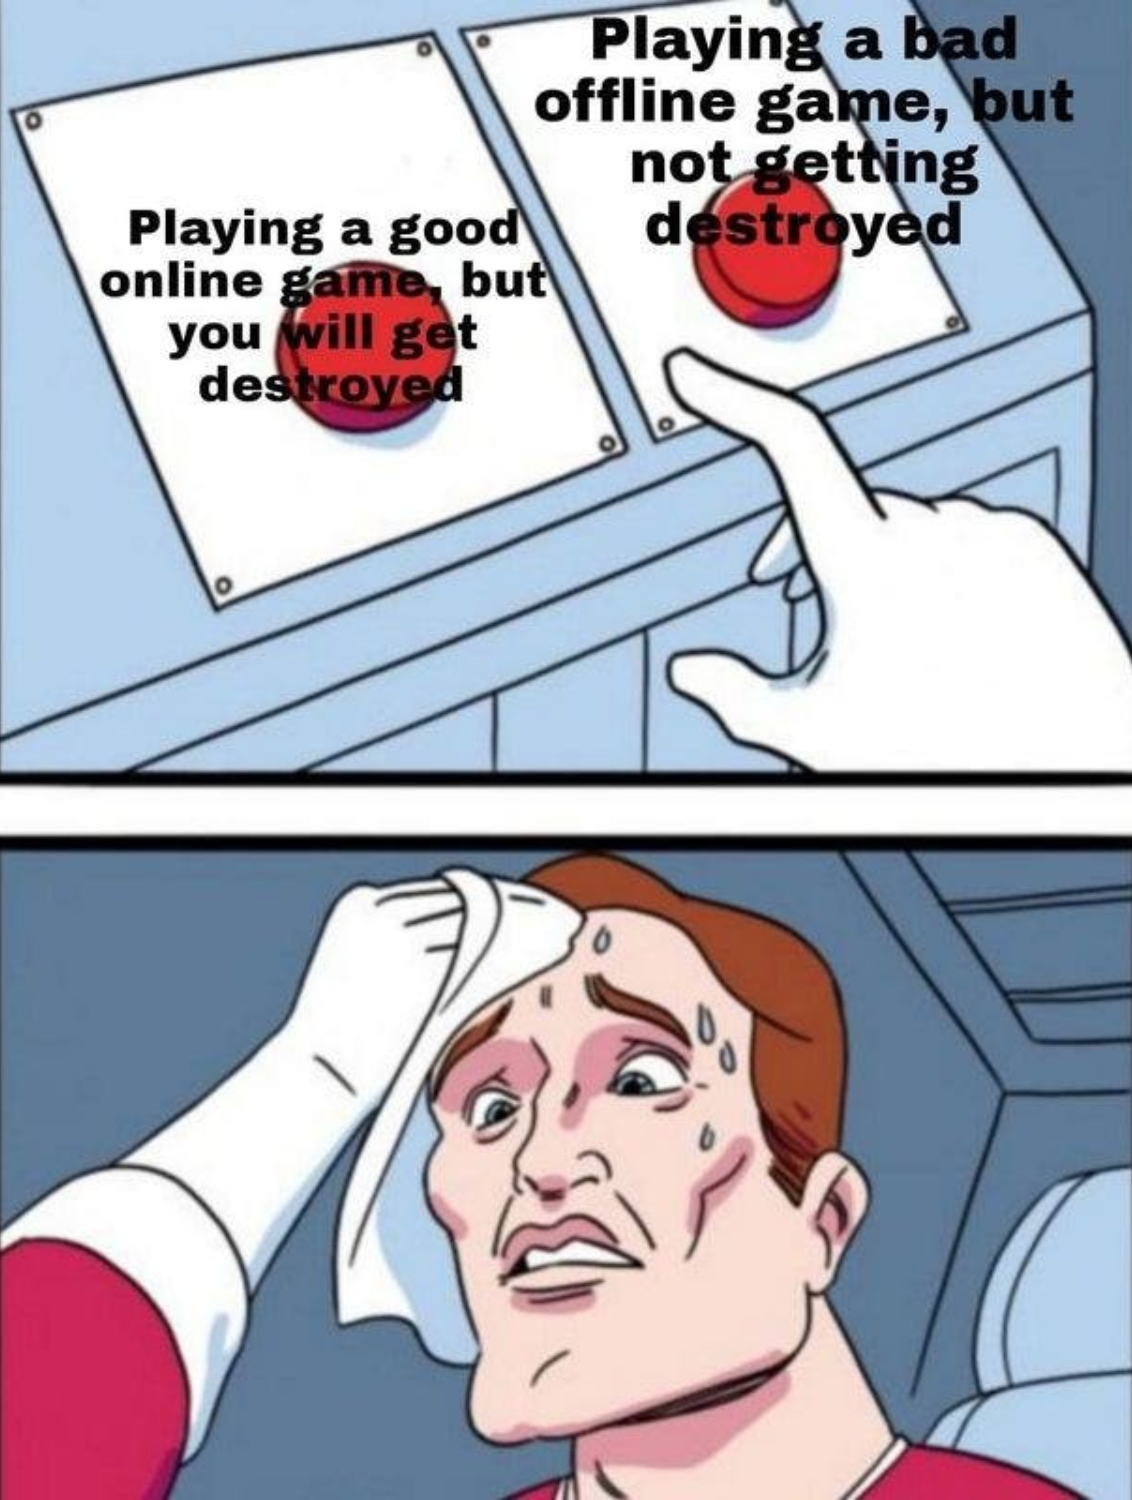 funny gaming memes - bad and worse meme - Playing a bad offline game, but not getting Playing a good destroyed online game, but you will get destroyed